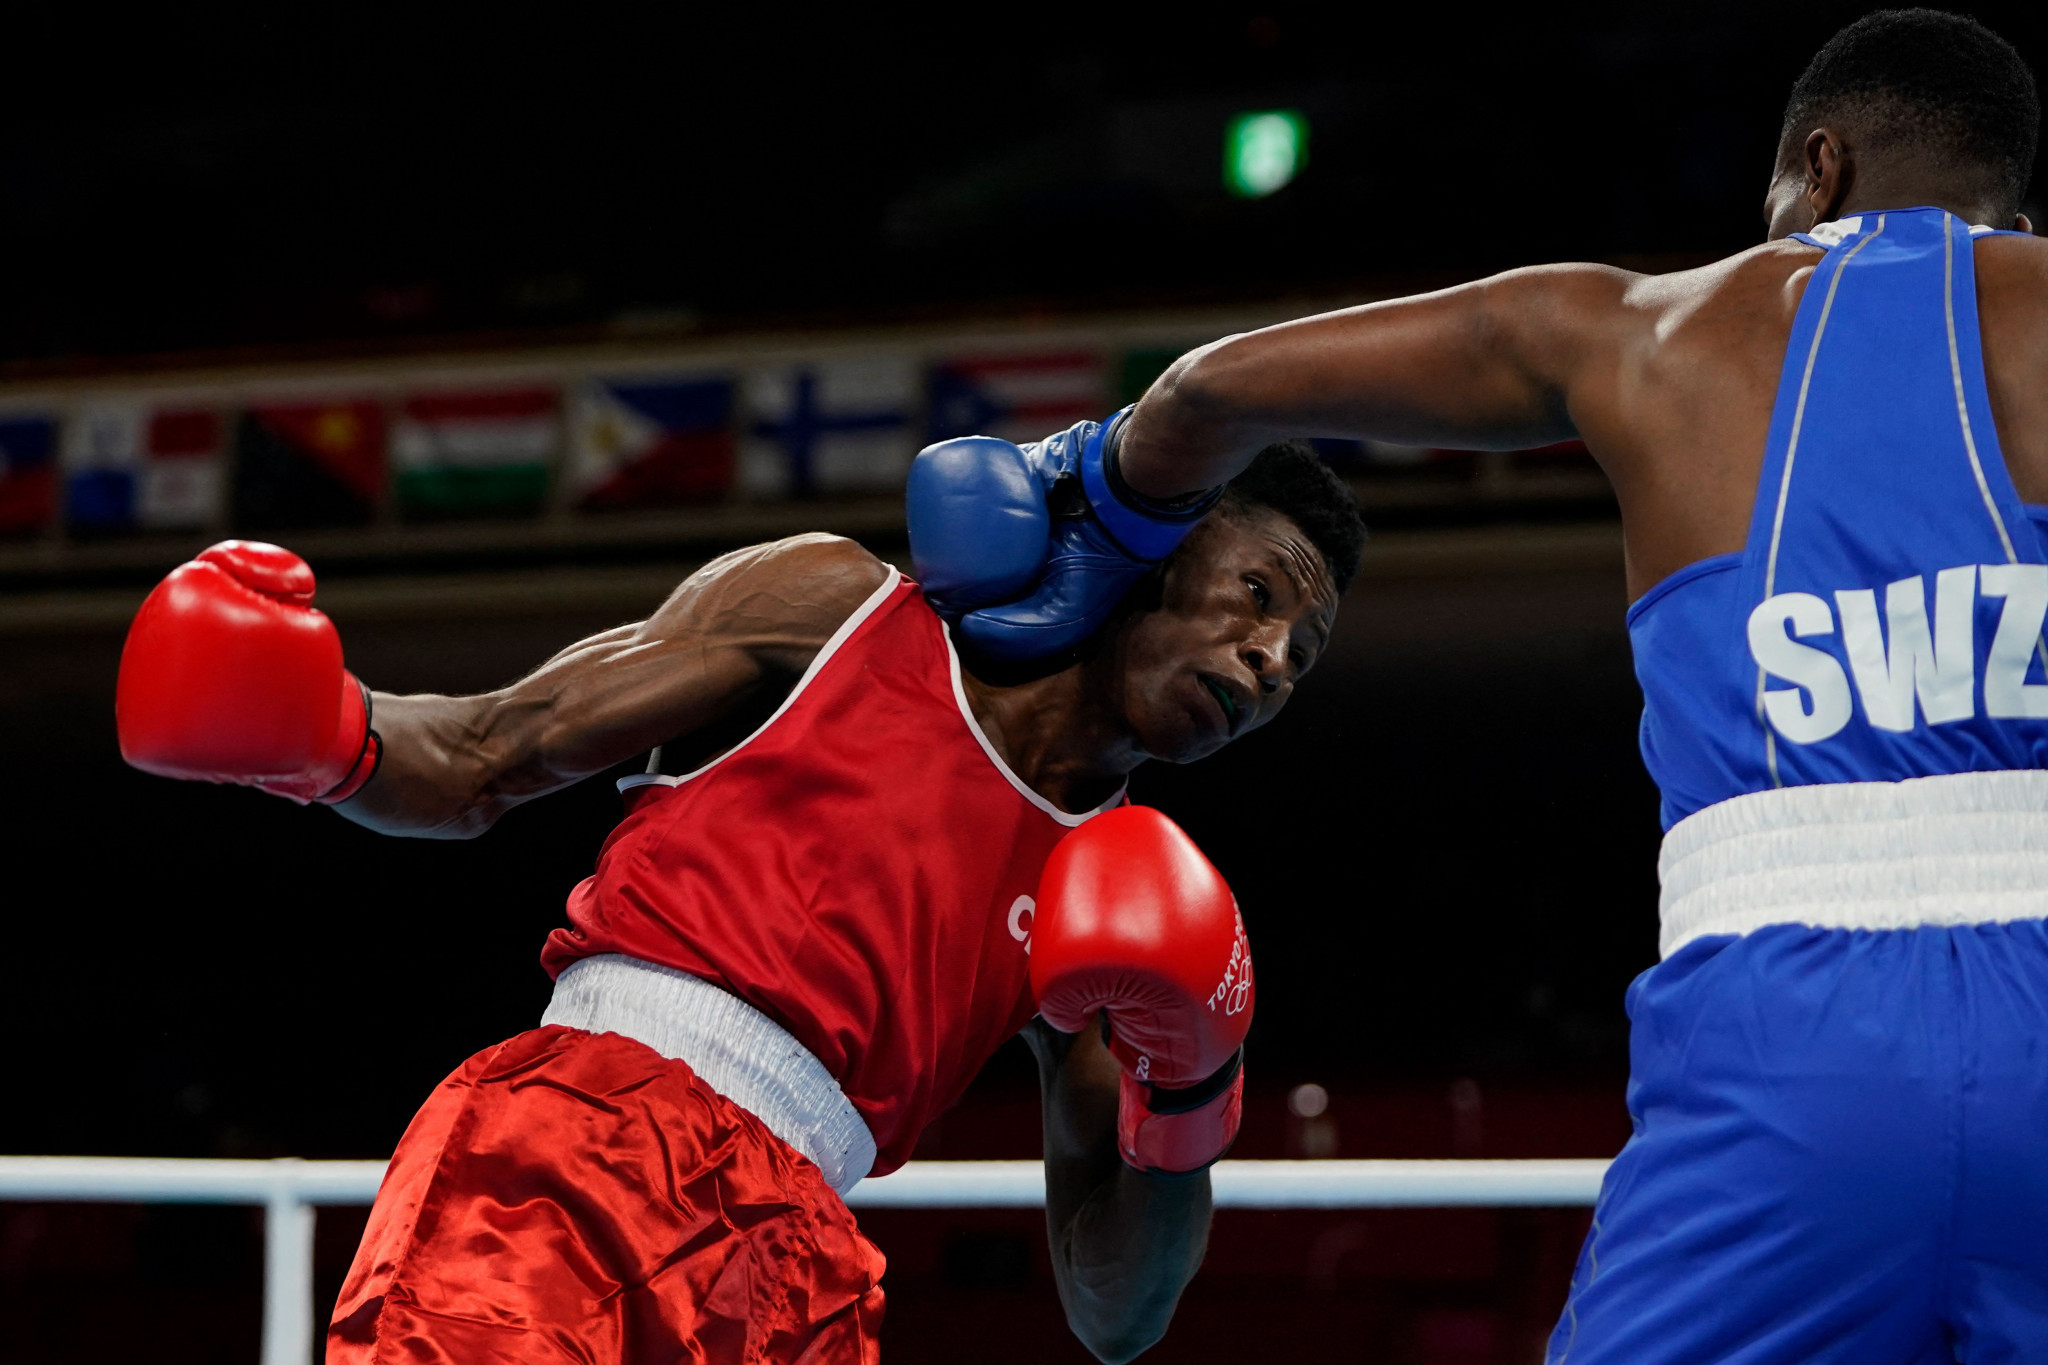 Boxing has been a successful sport for Swaziland - now Eswatini - at the Commonwealth Games ©Getty Images